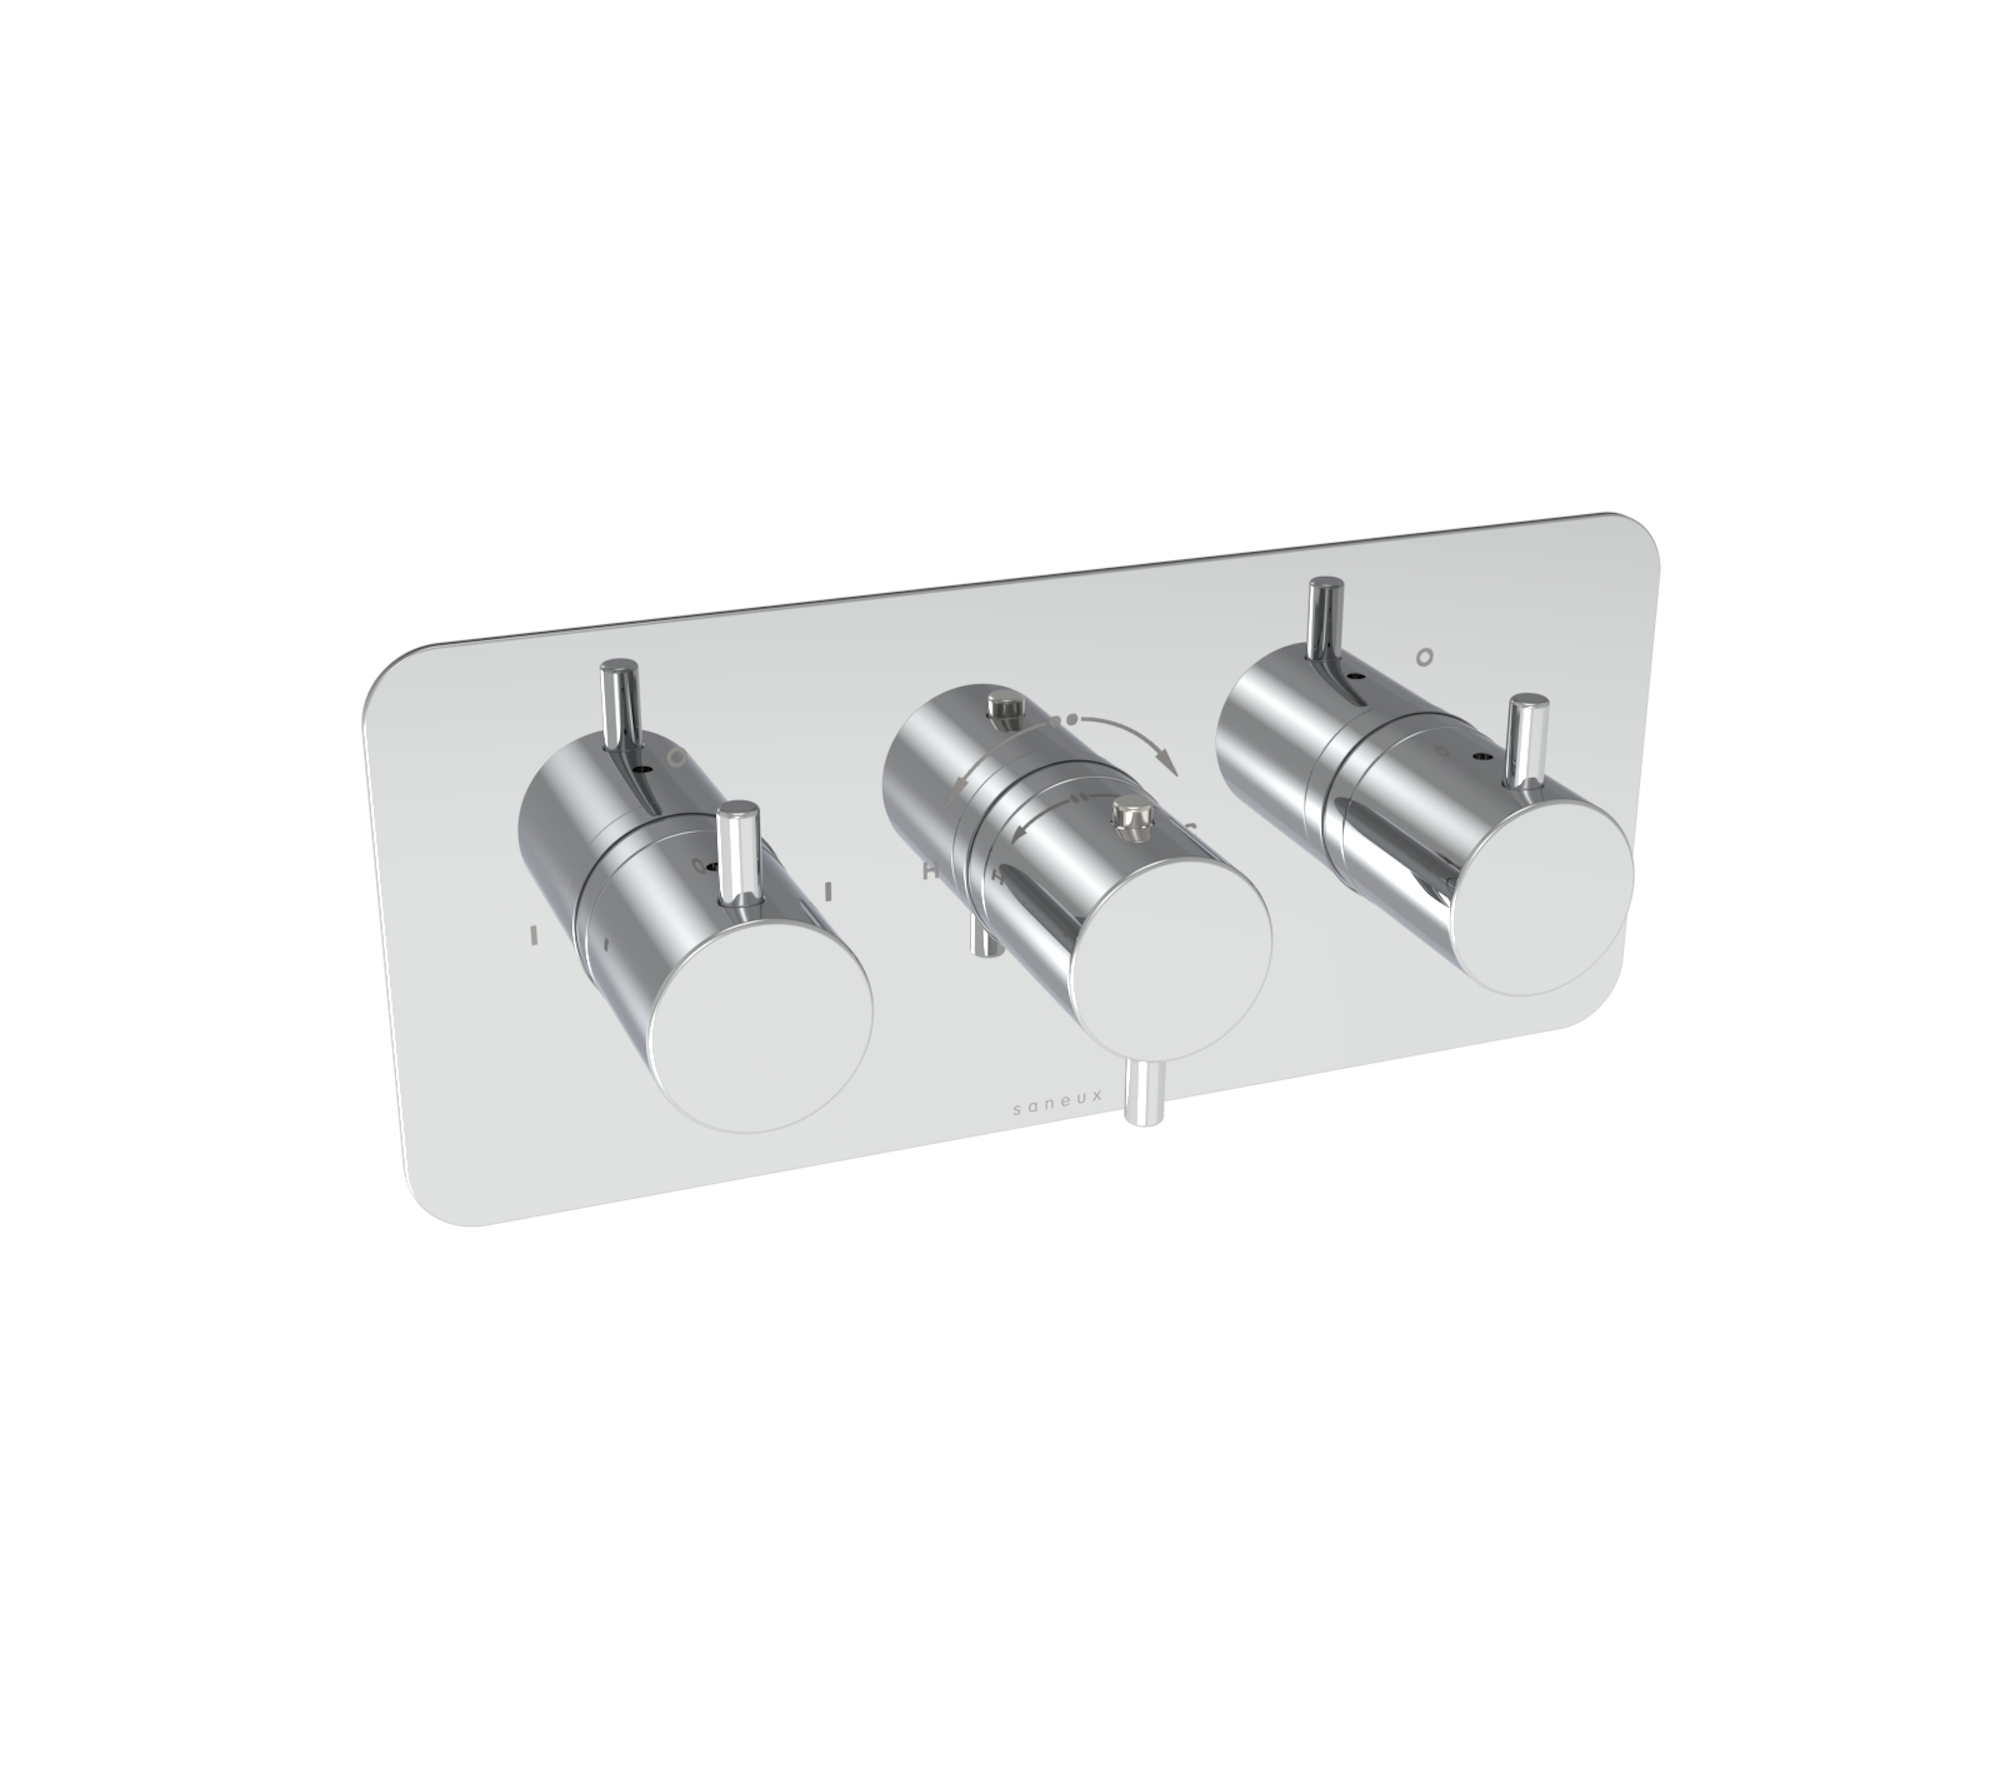 COS 3 way thermostatic shower valve kit in landscape - Chrome